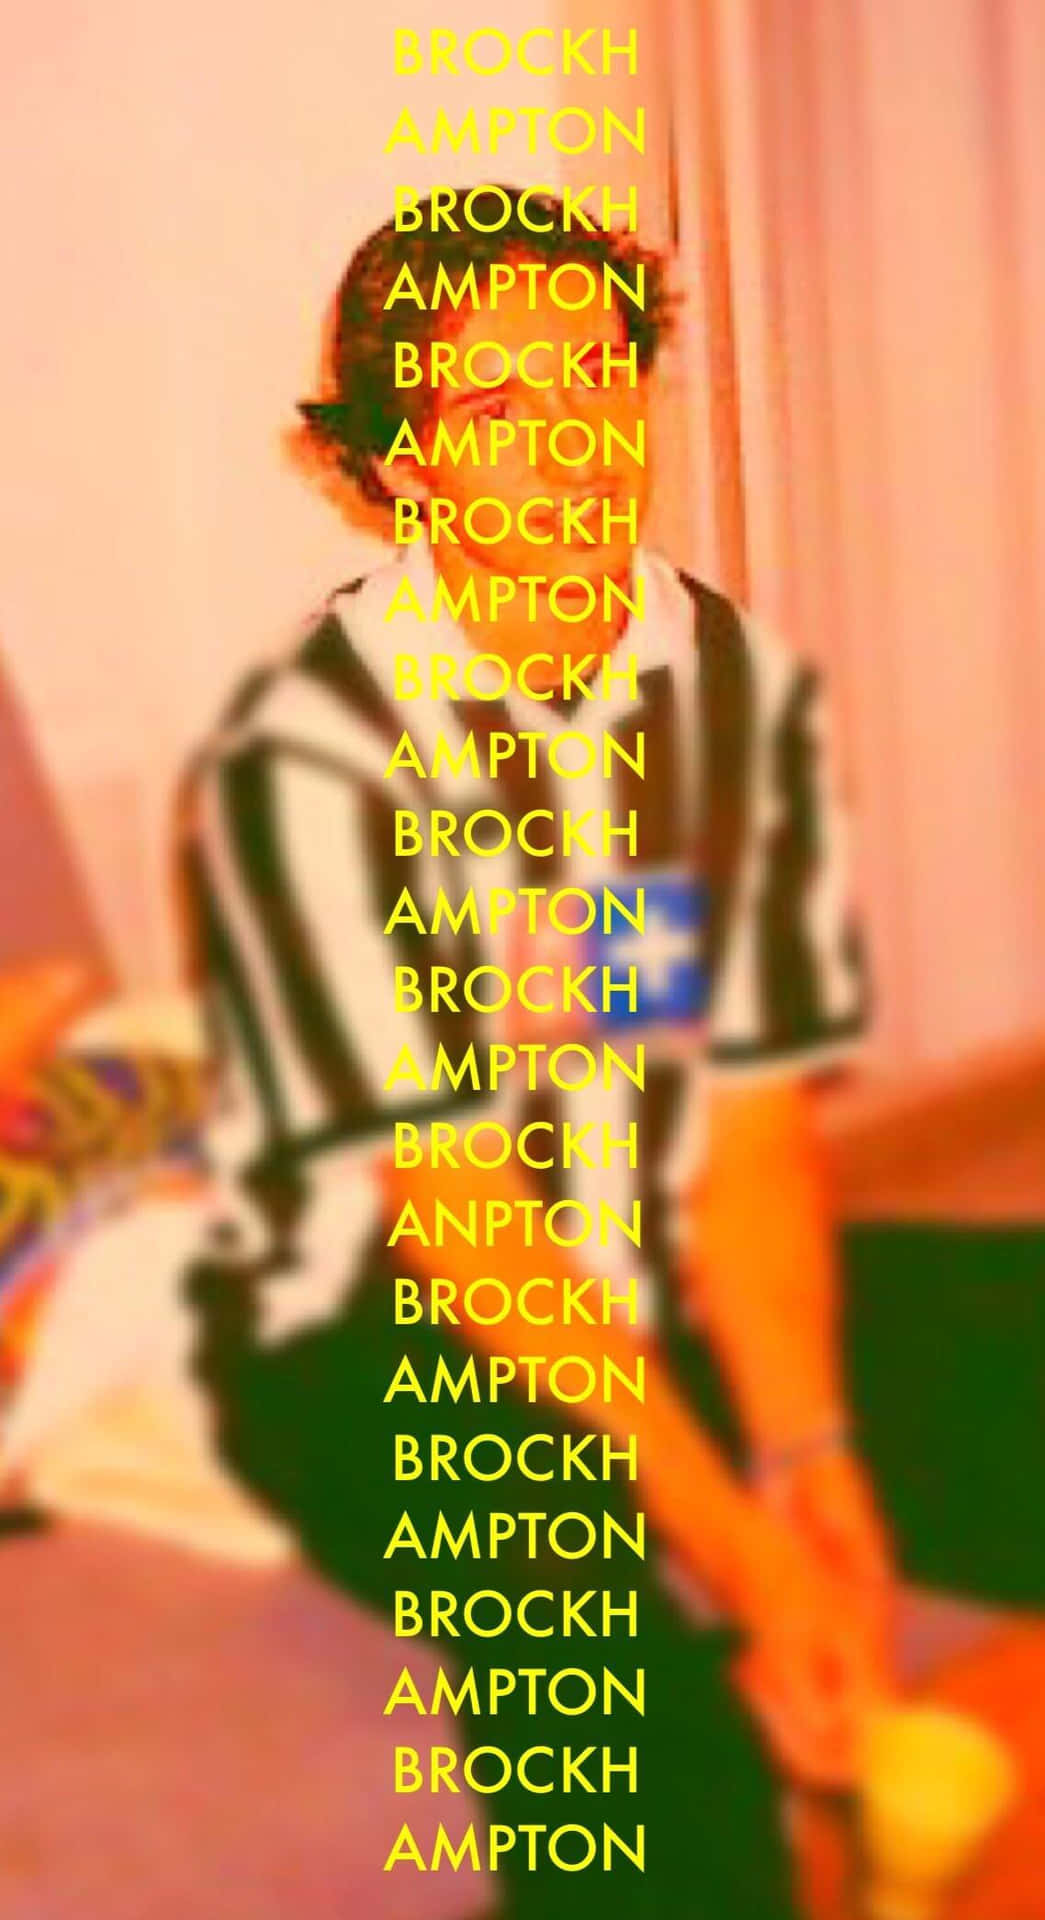 Caption: Iconic Group, Brockhampton, Performing On Stage Wallpaper